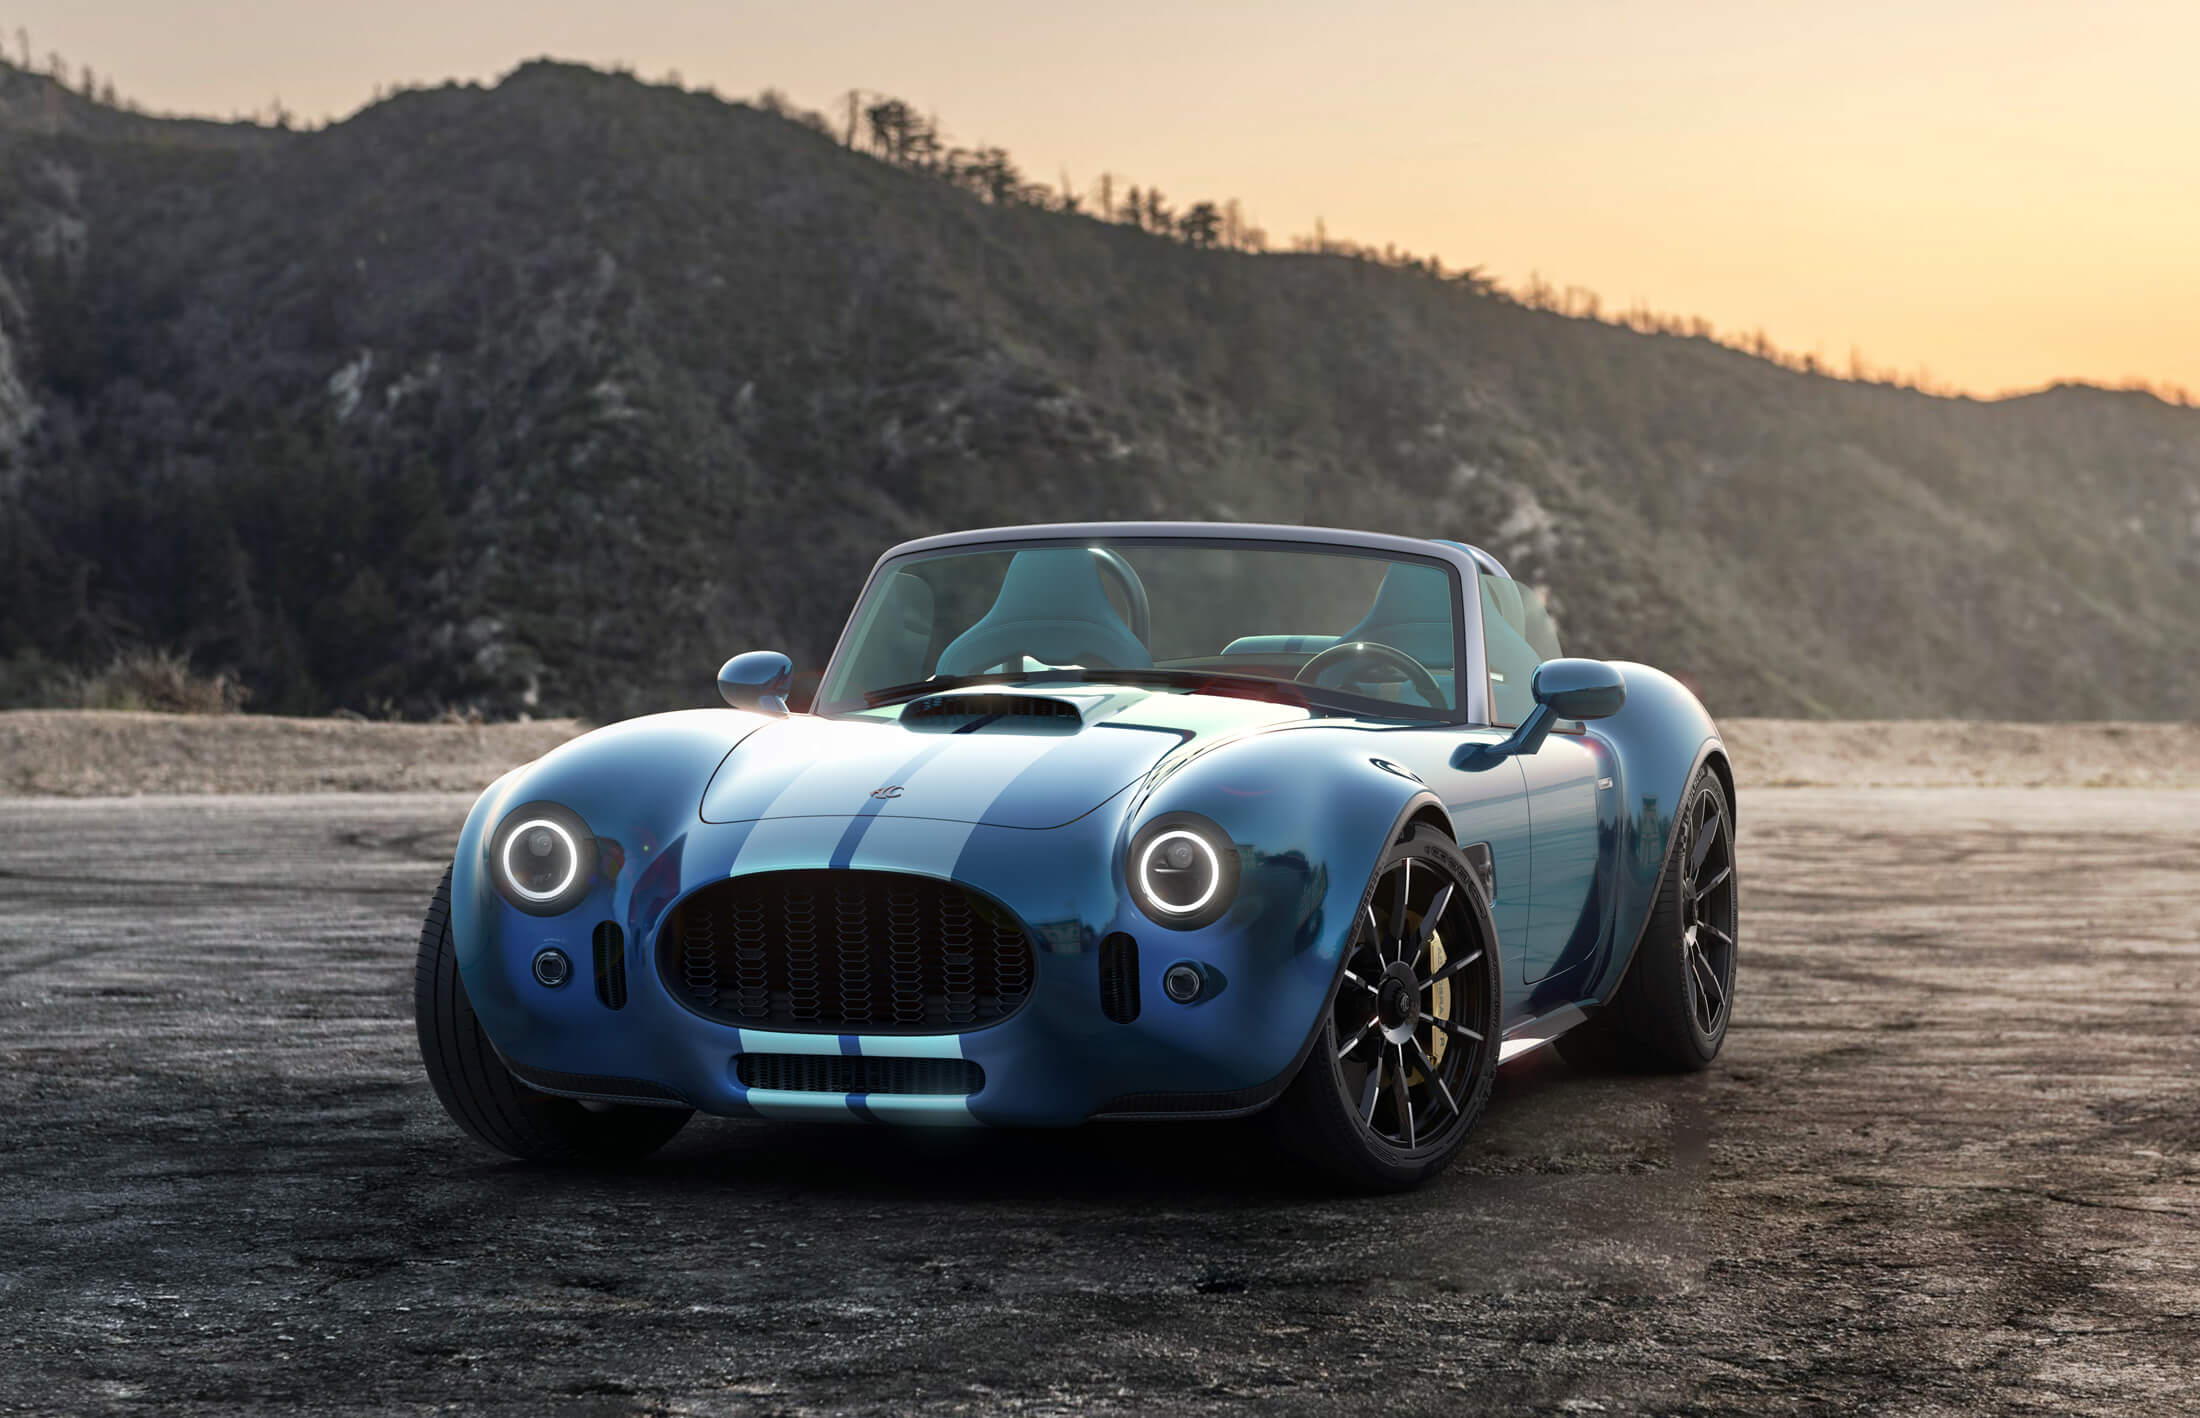 Front three quarters photo of the new AC Cobra in blue with white stripes